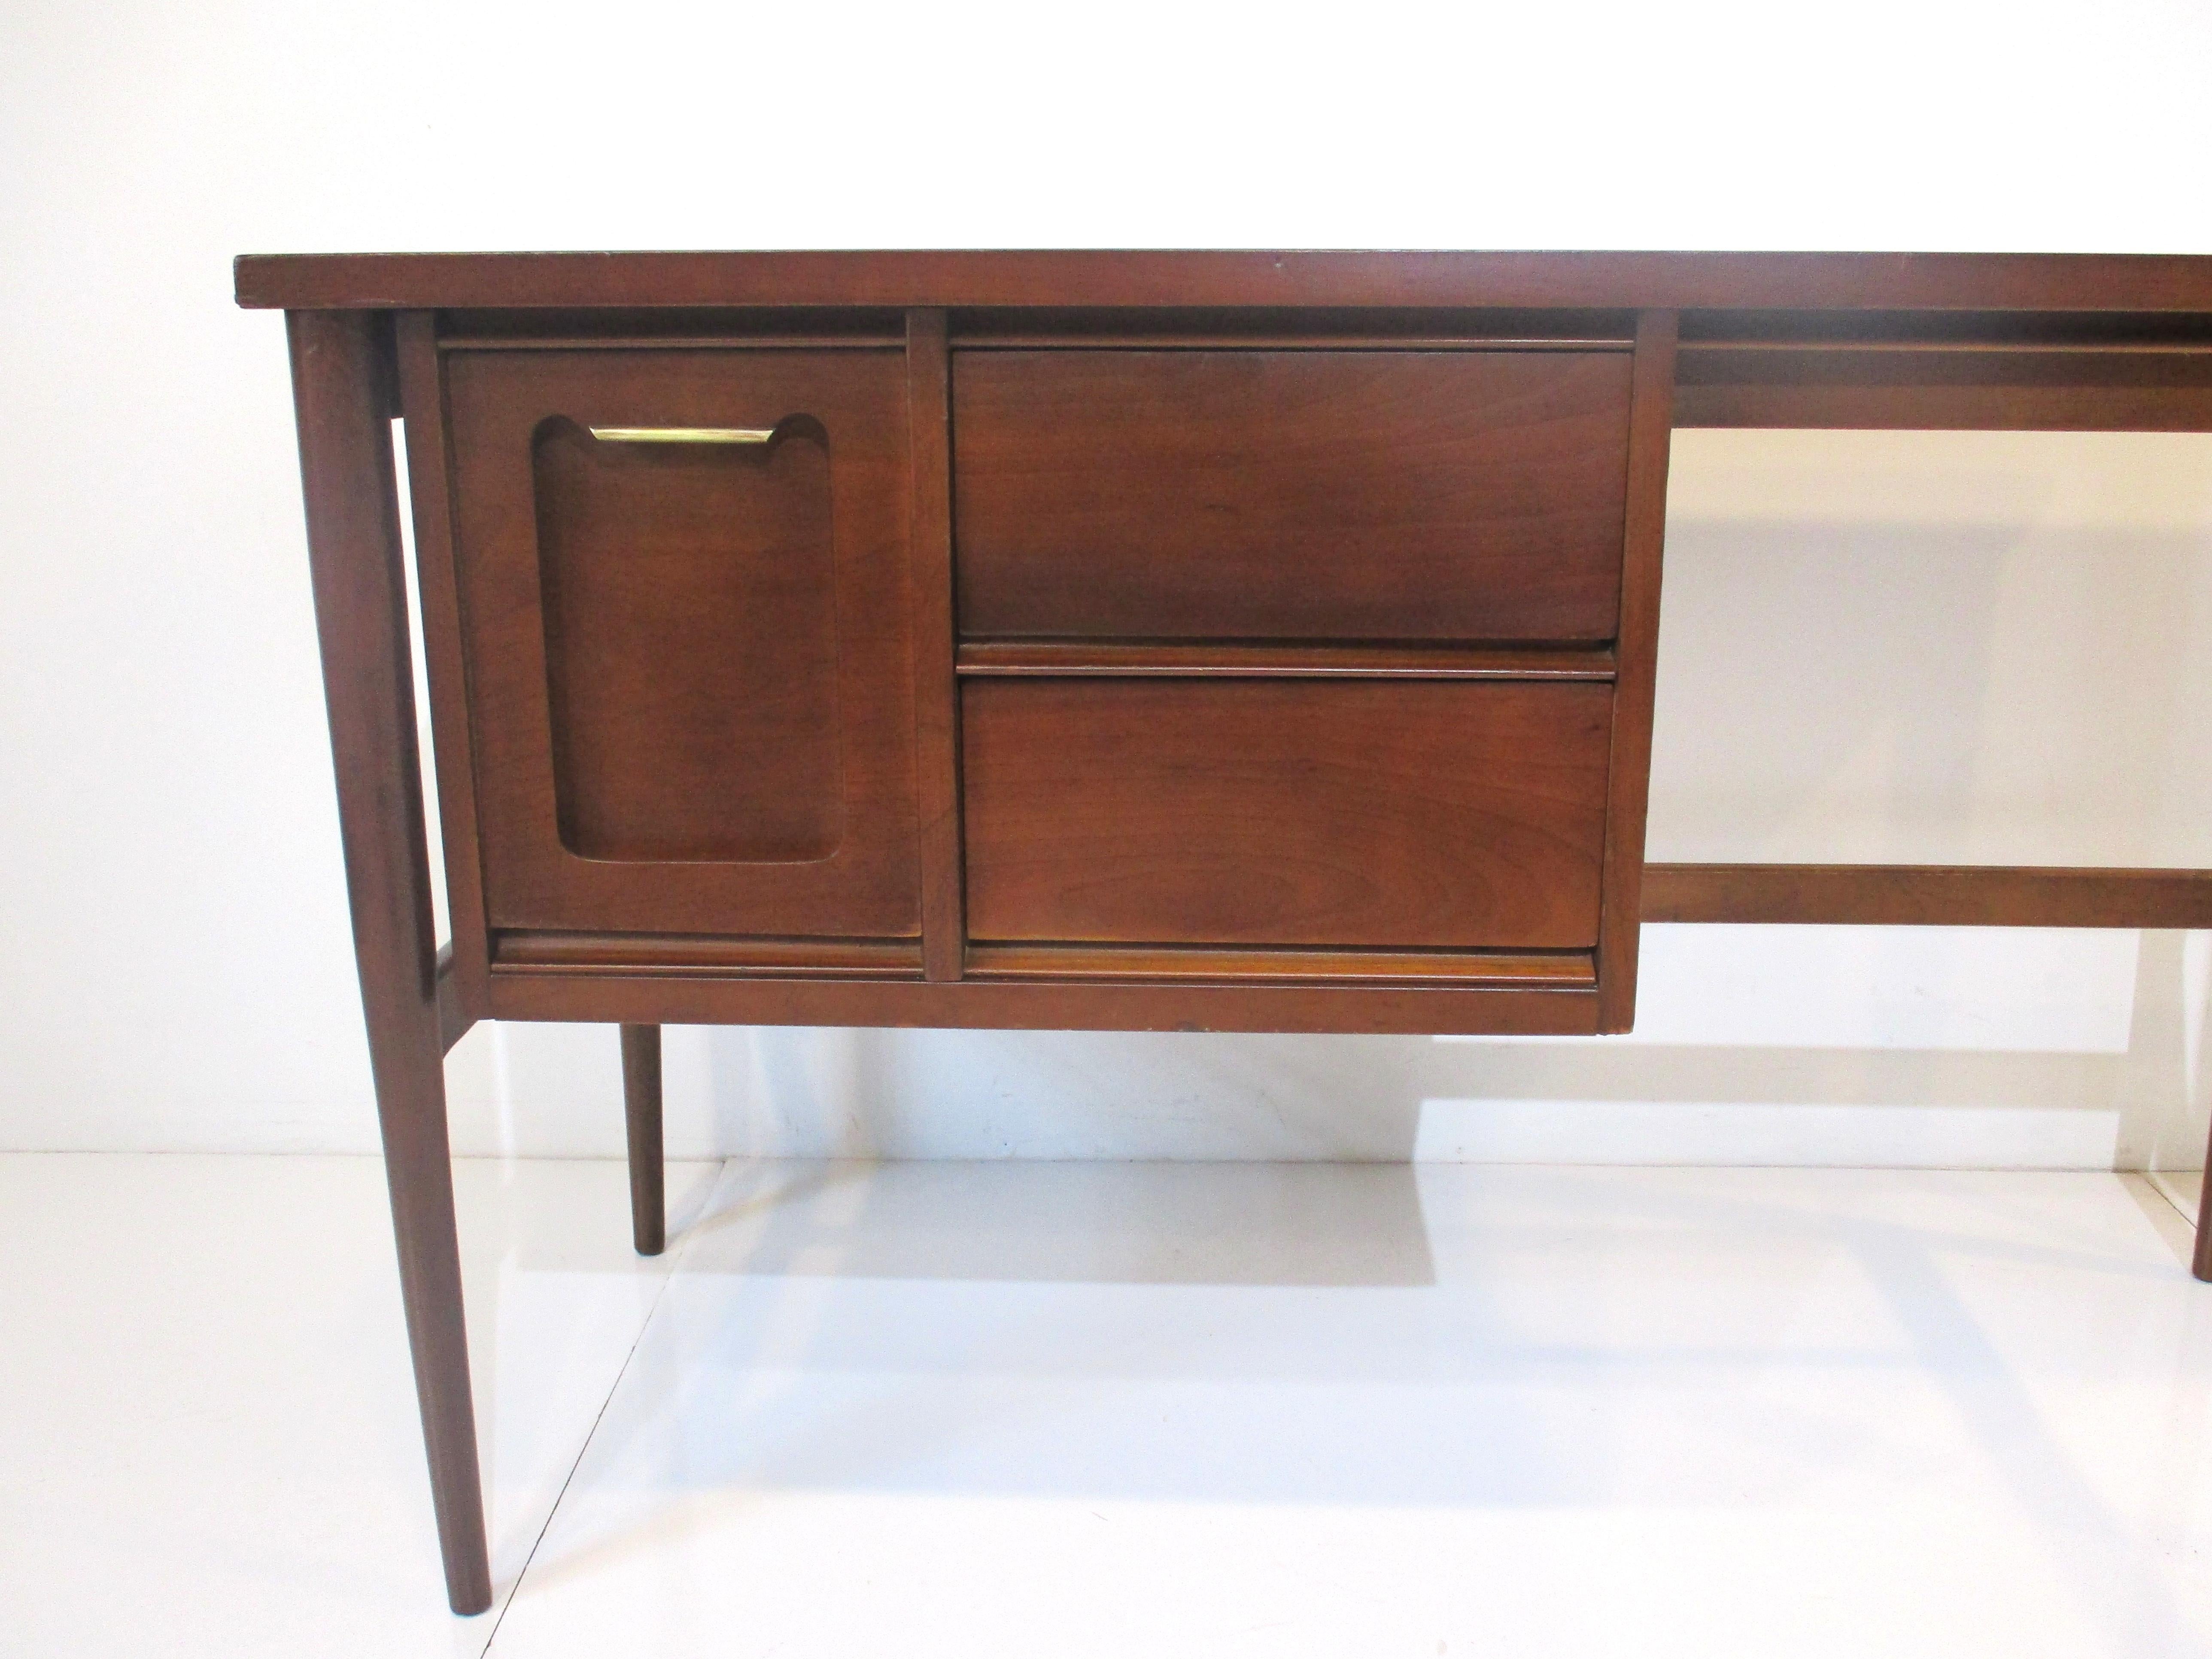 A medium walnut toned mid-century desk with a file drawer having a cutout design detail to the front and a thin upper brass pull and two regular drawers . The kneehole has a lower cross stretcher and conical legs manufactured by the Bassett